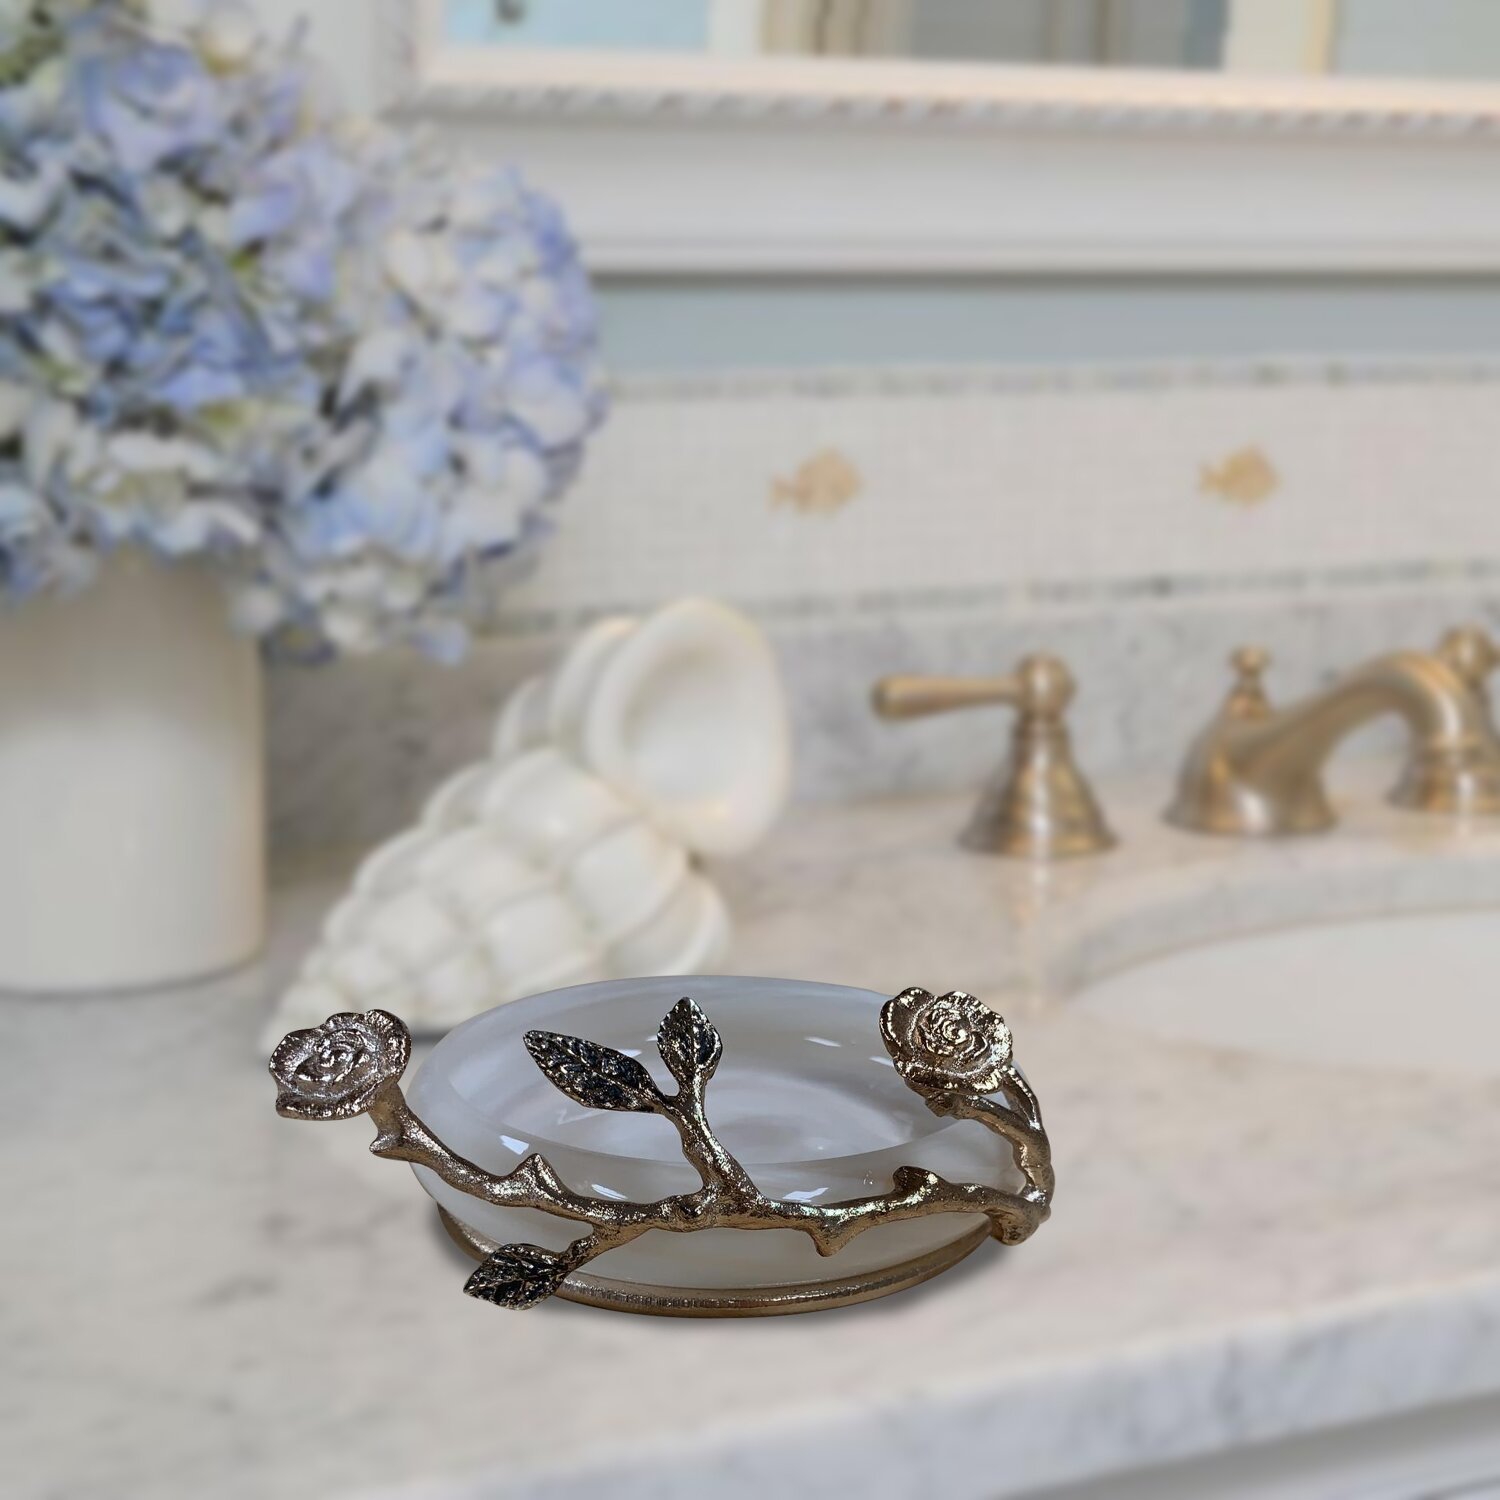 Show Off Your Soap with a Decorative Dish